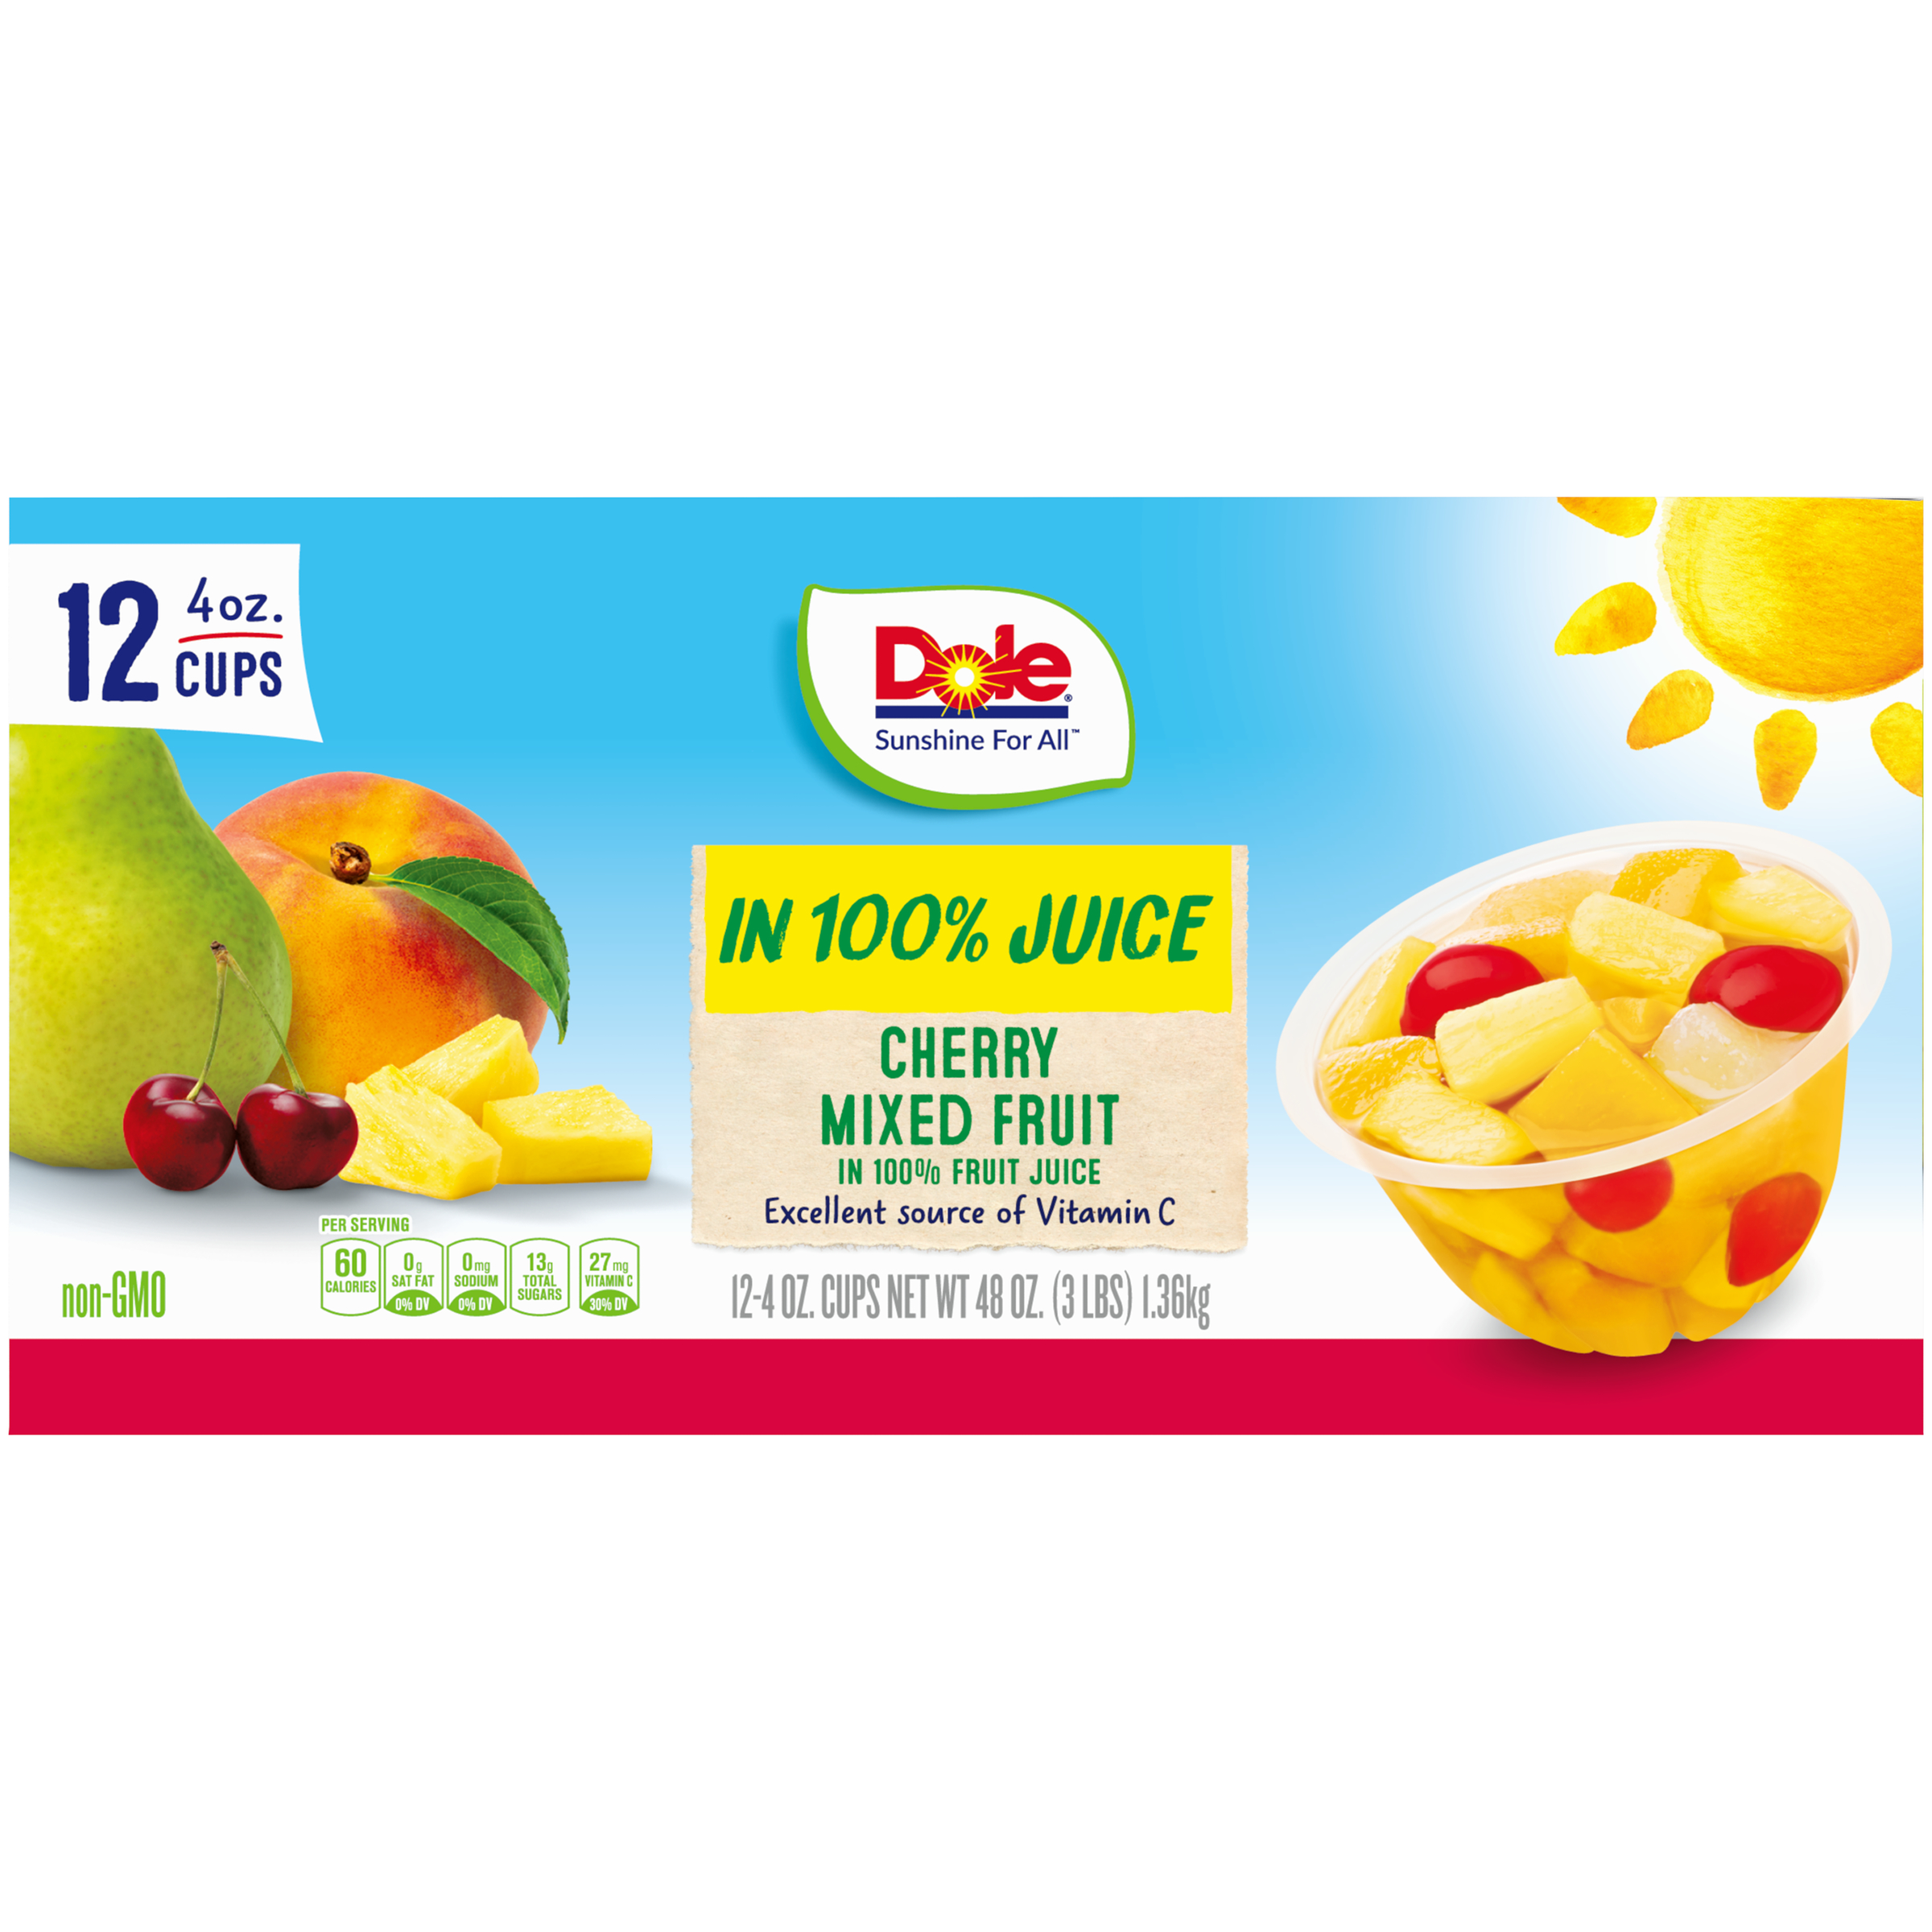 Dole Fruit Bowls Cherry Mixed Fruit in 100% Fruit Juice, 4 oz (12 Cups) - image 2 of 10